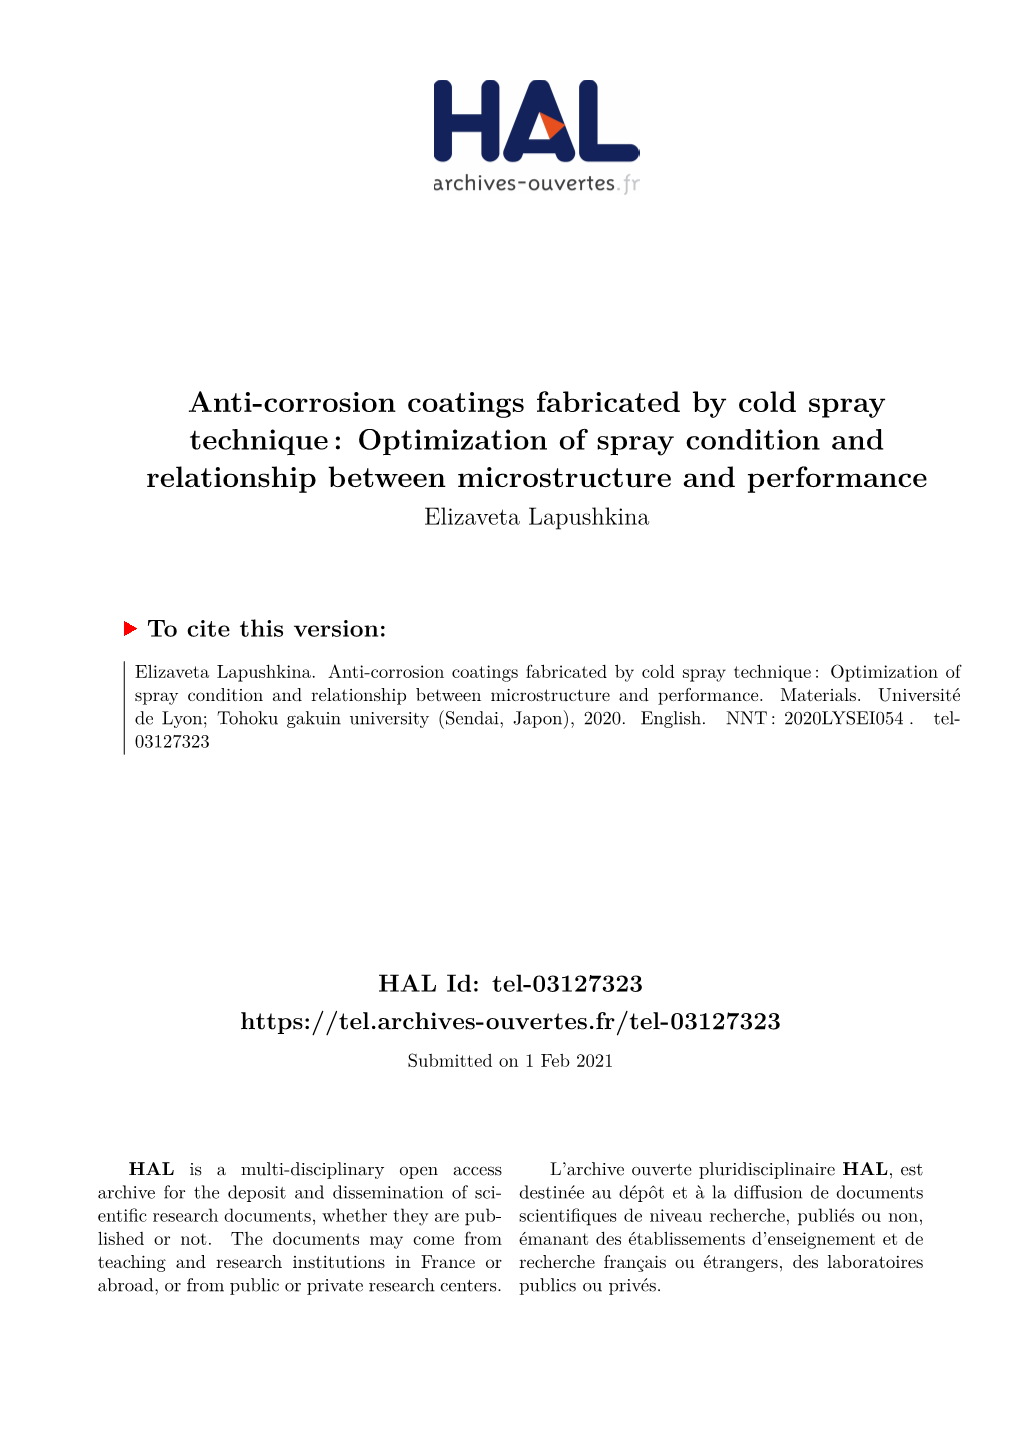 Anti-Corrosion Coatings Fabricated by Cold Spray Technique: Optimization of Spray Condition and Relationship Between Microstructure and Performance